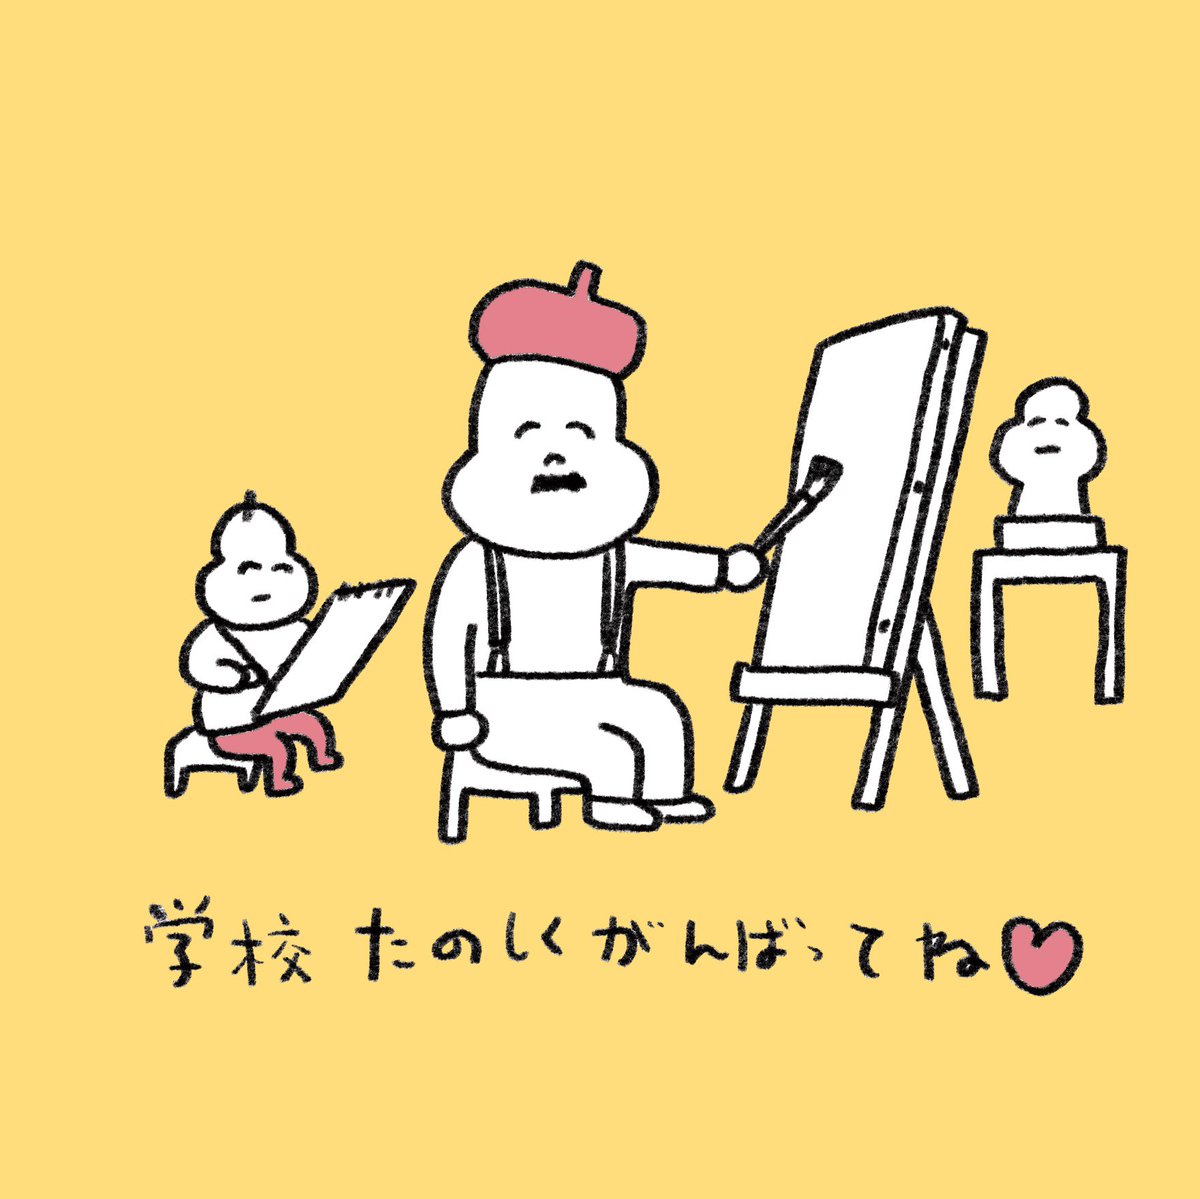 canvas (object) yellow background palette (object) hat easel red headwear sitting  illustration images